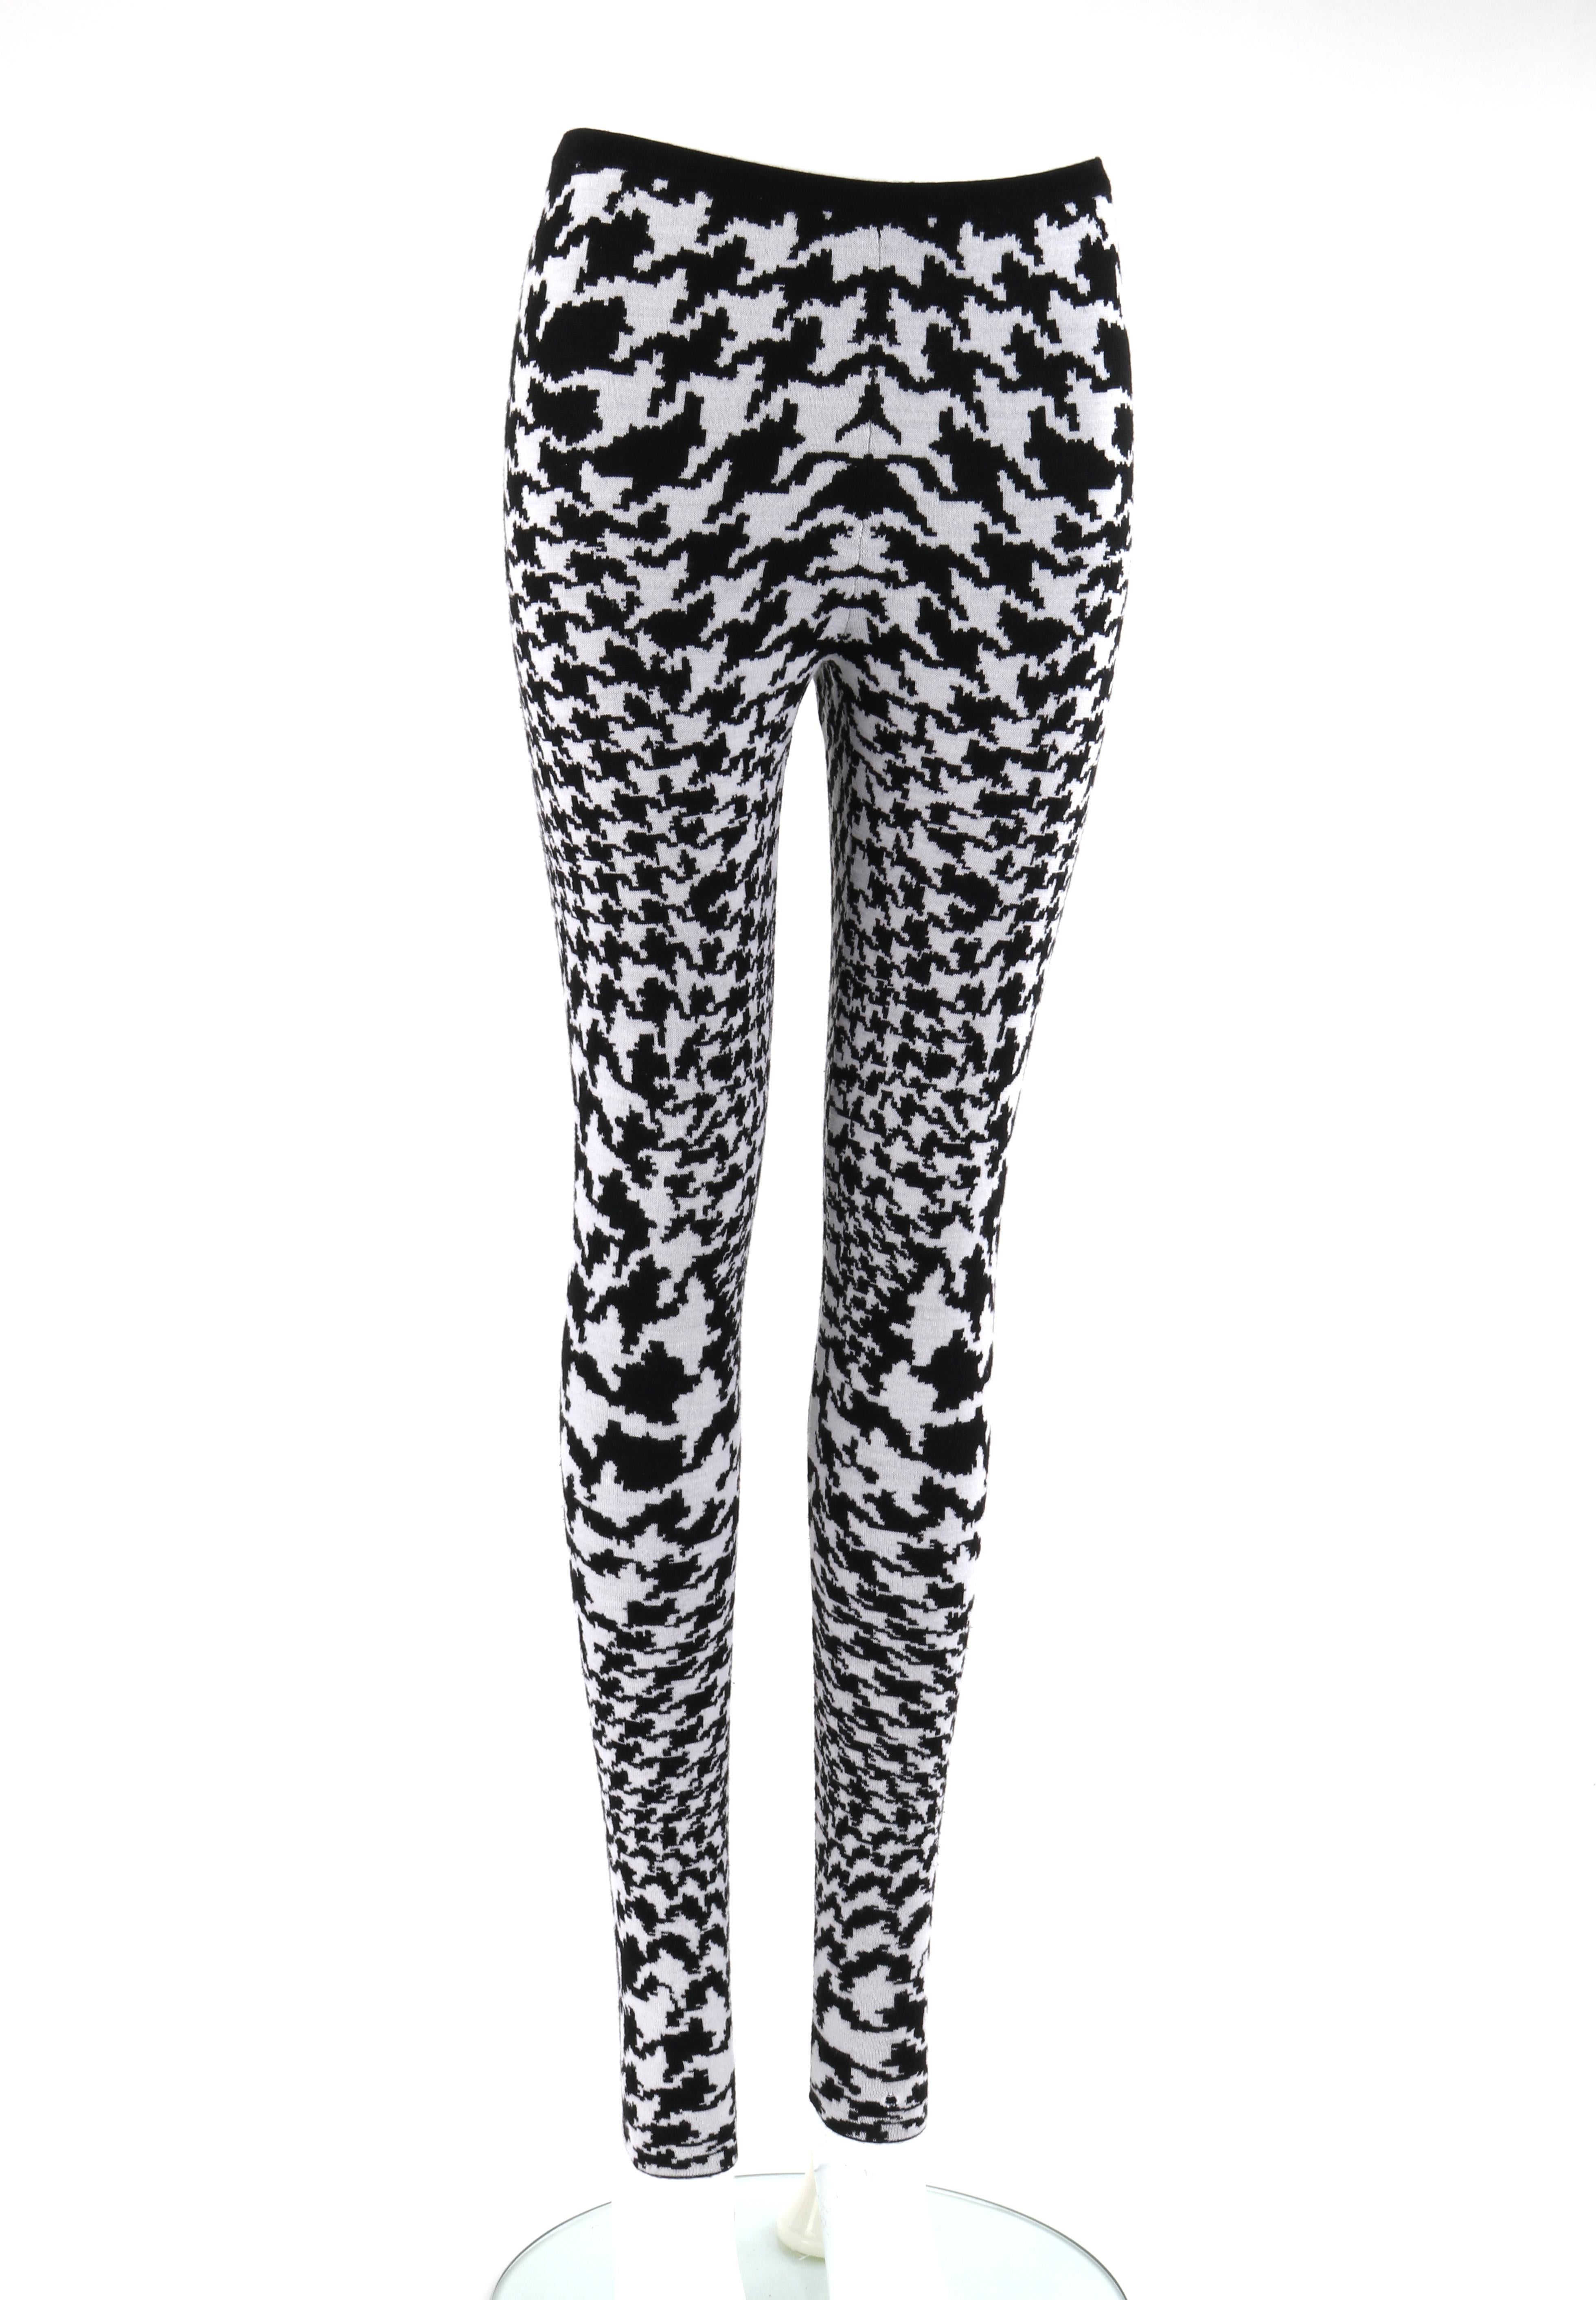 ALEXANDER McQUEEN A/W 2009 “The Horn Of Plenty” Dogtooth Knit Stretch Legging

Brand / Manufacturer: Alexander McQueen
Collection: A/W 2009 “The Horn Of Plenty”
Designer: Alexander McQueen
Style: Legging
Color(s): Black and white
Lined: No
Marked